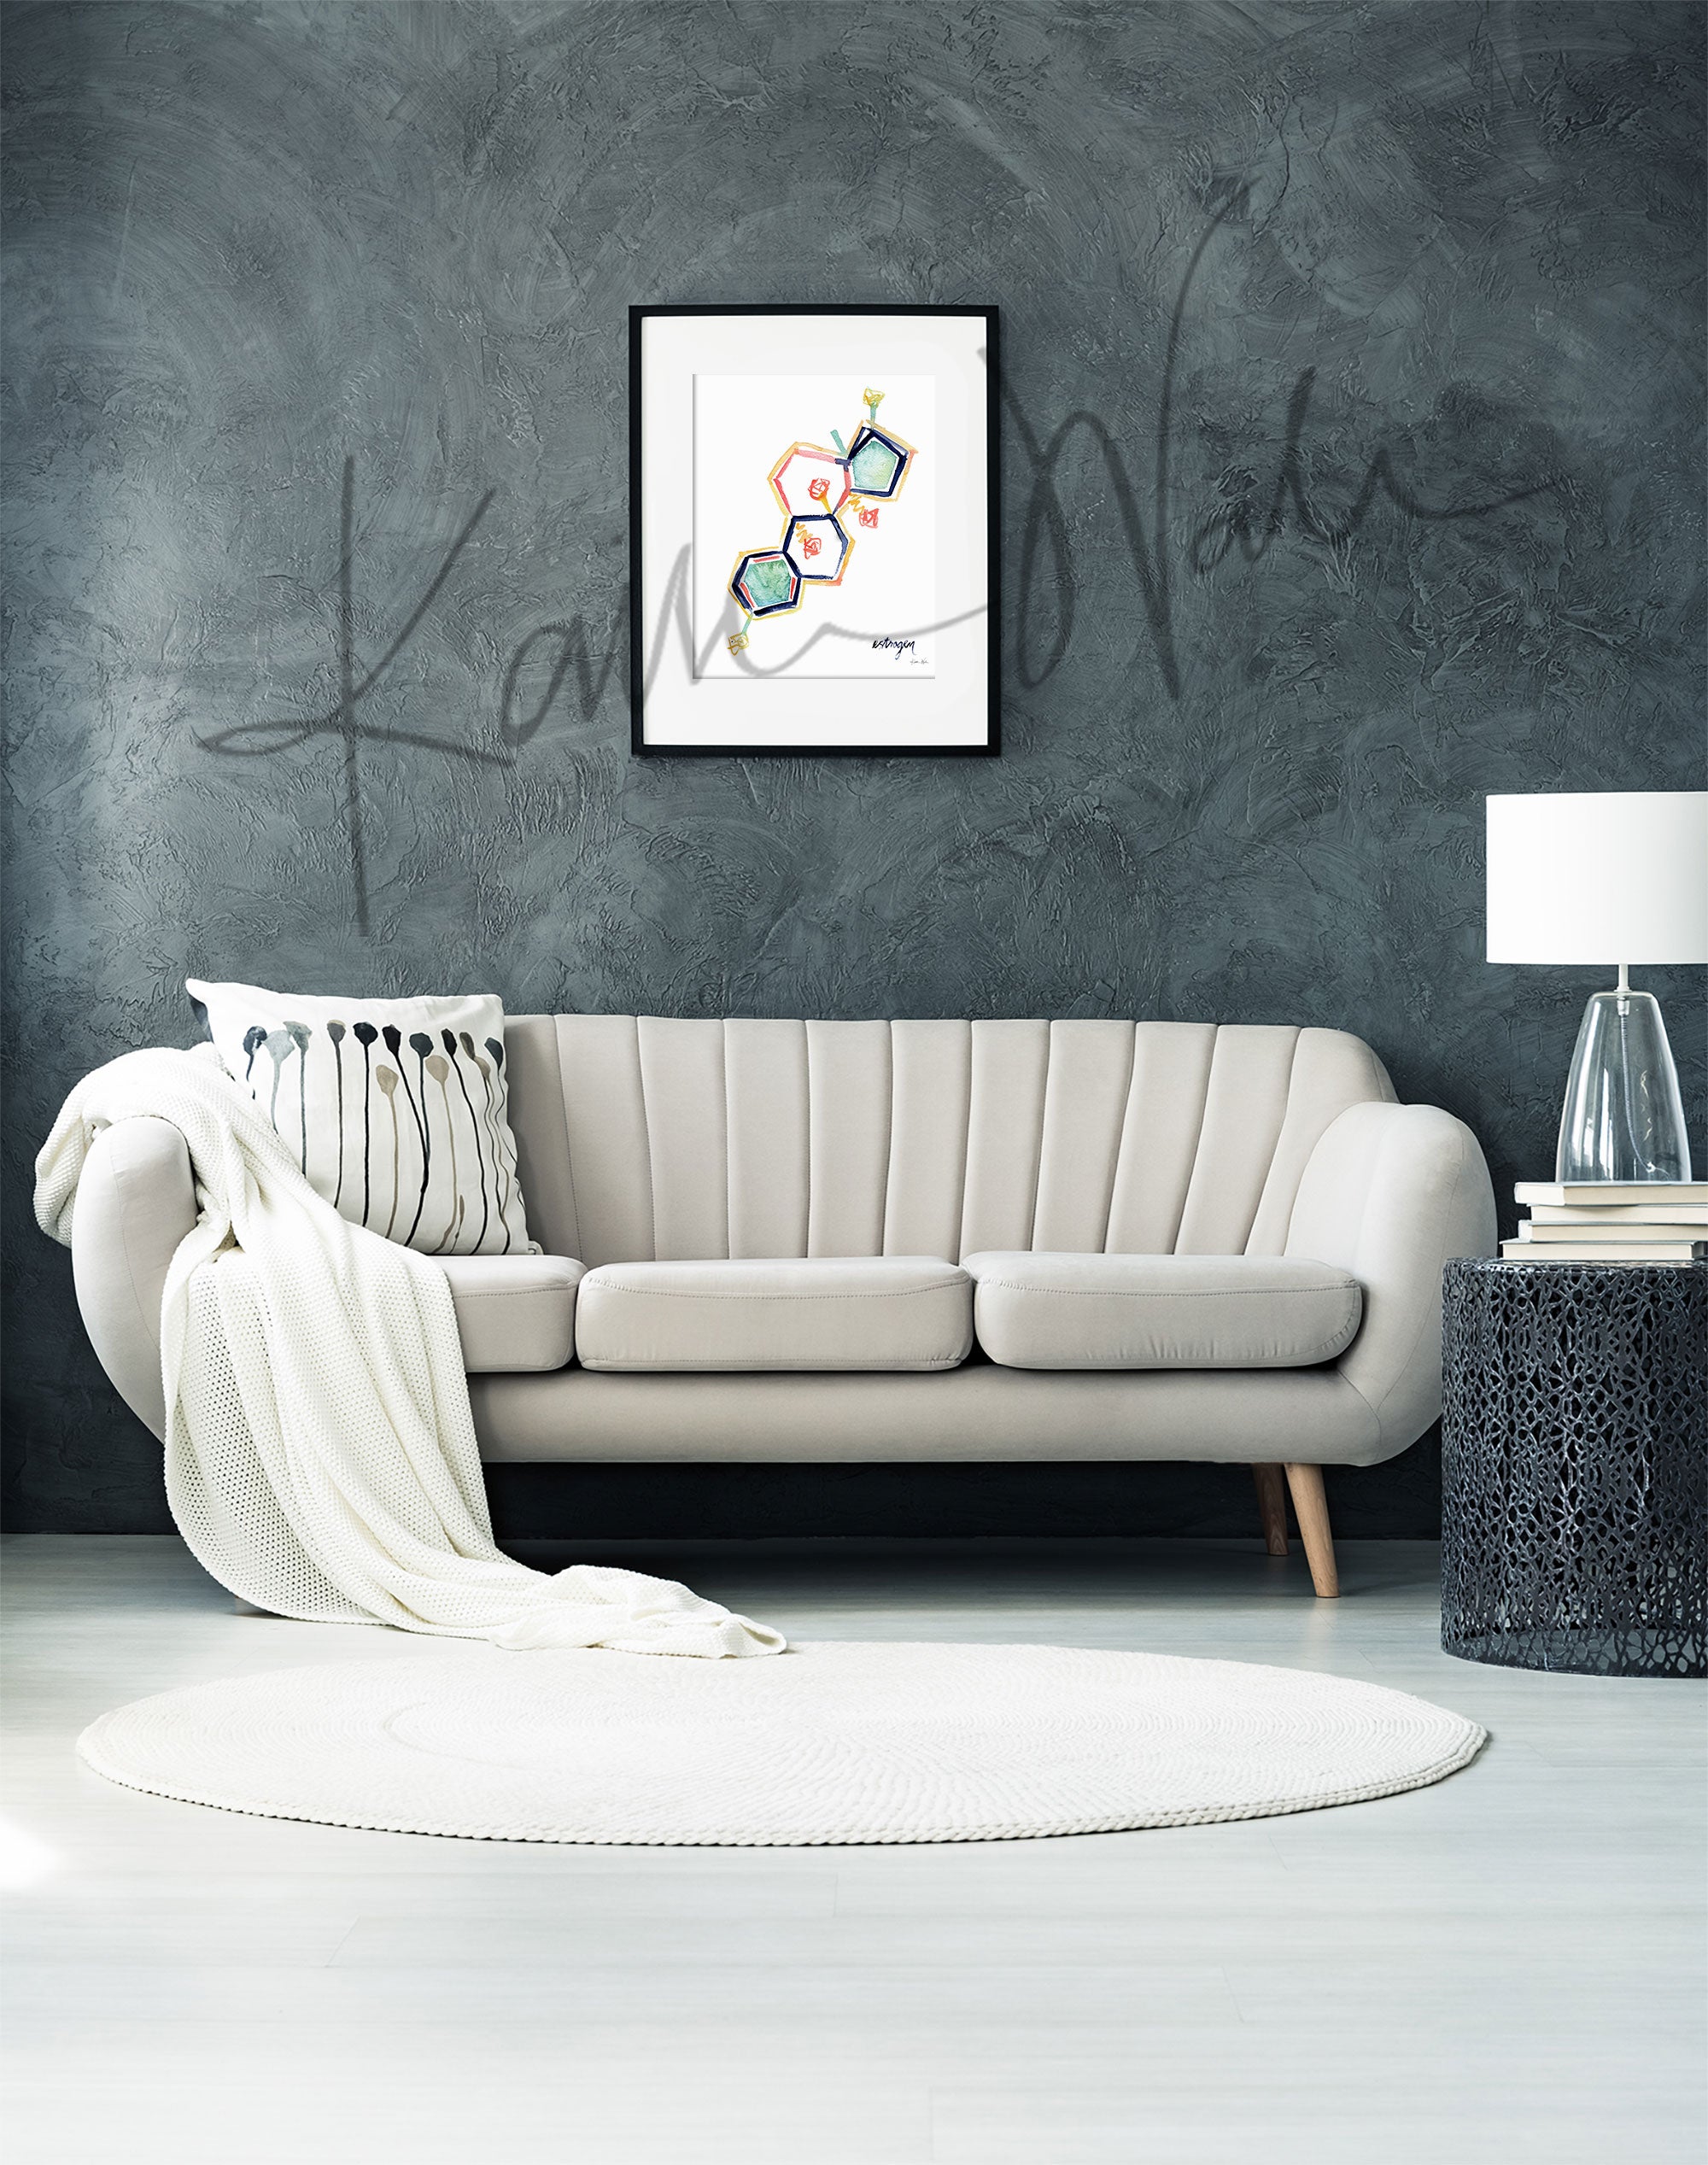 Framed watercolor painting of the estrogen hormone structure. The painting is hanging over a white couch.